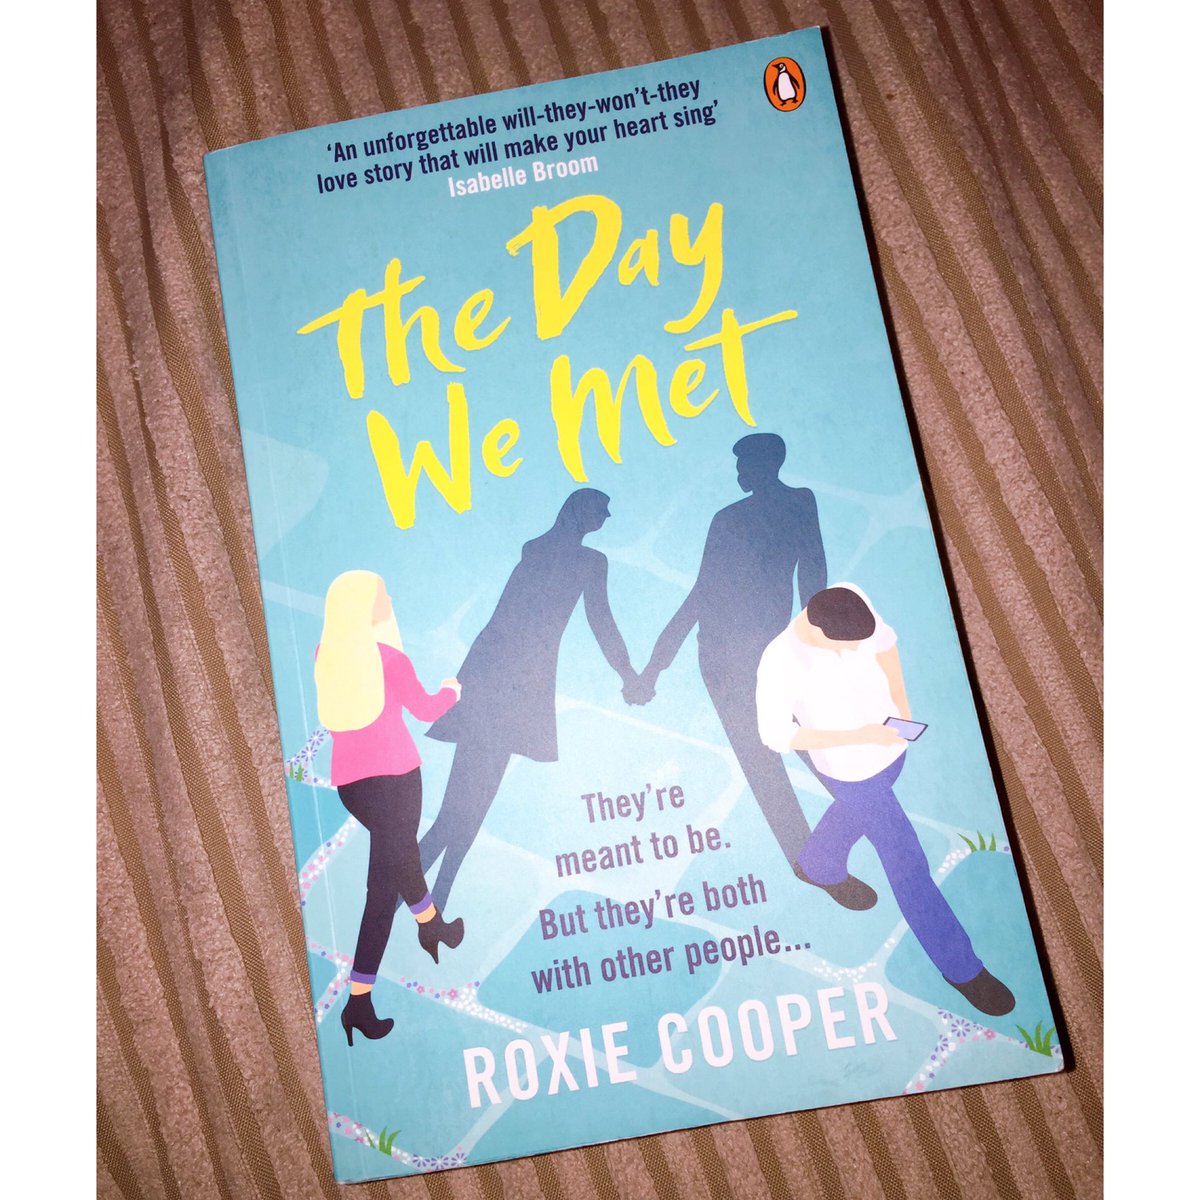 5 days later and I’ve finished my 5th book of the year - The Day We Met by @toodletinkbaby! As soon as I picked this book up I was itching to get through each chapter. Such a heartbreaking story written in such a beautiful and charming way ❤️ #reading #books